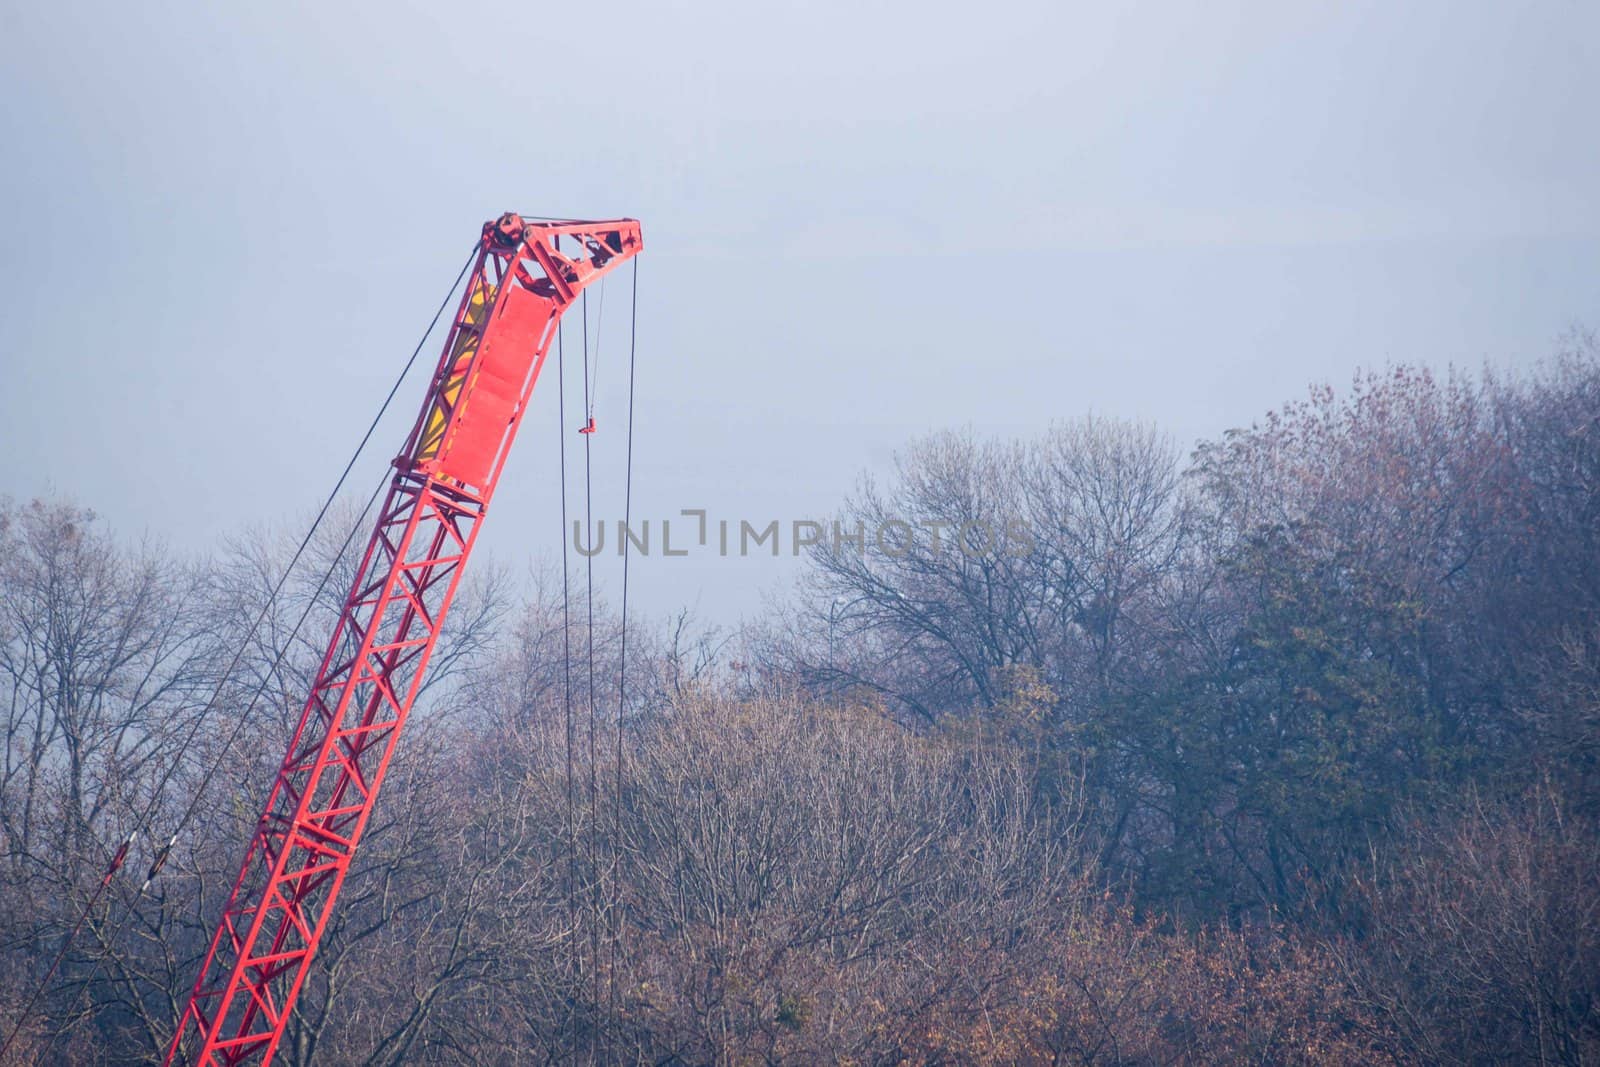 Construction process with construction automotive crane with red gibbet. Autumn fog and river bridge  on blurred background. Forest around crane.